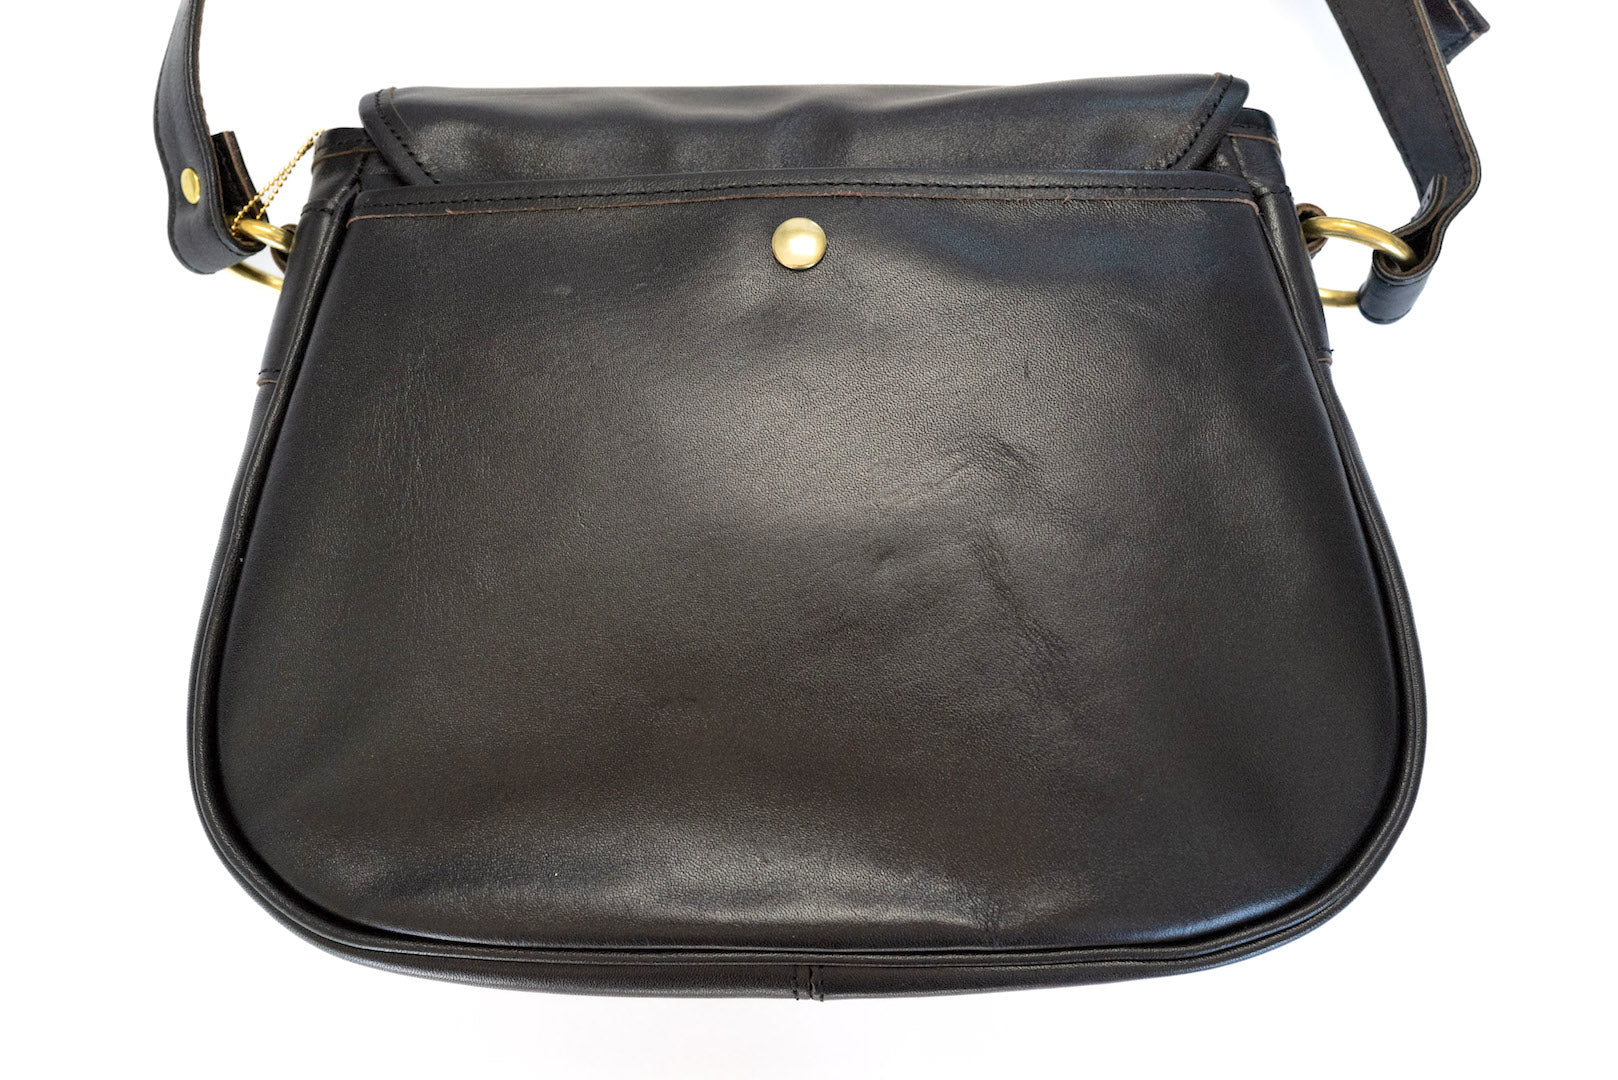 Inception by Accel Company "Size Small" Horsehide Mail Bag (Black Tea-cored)